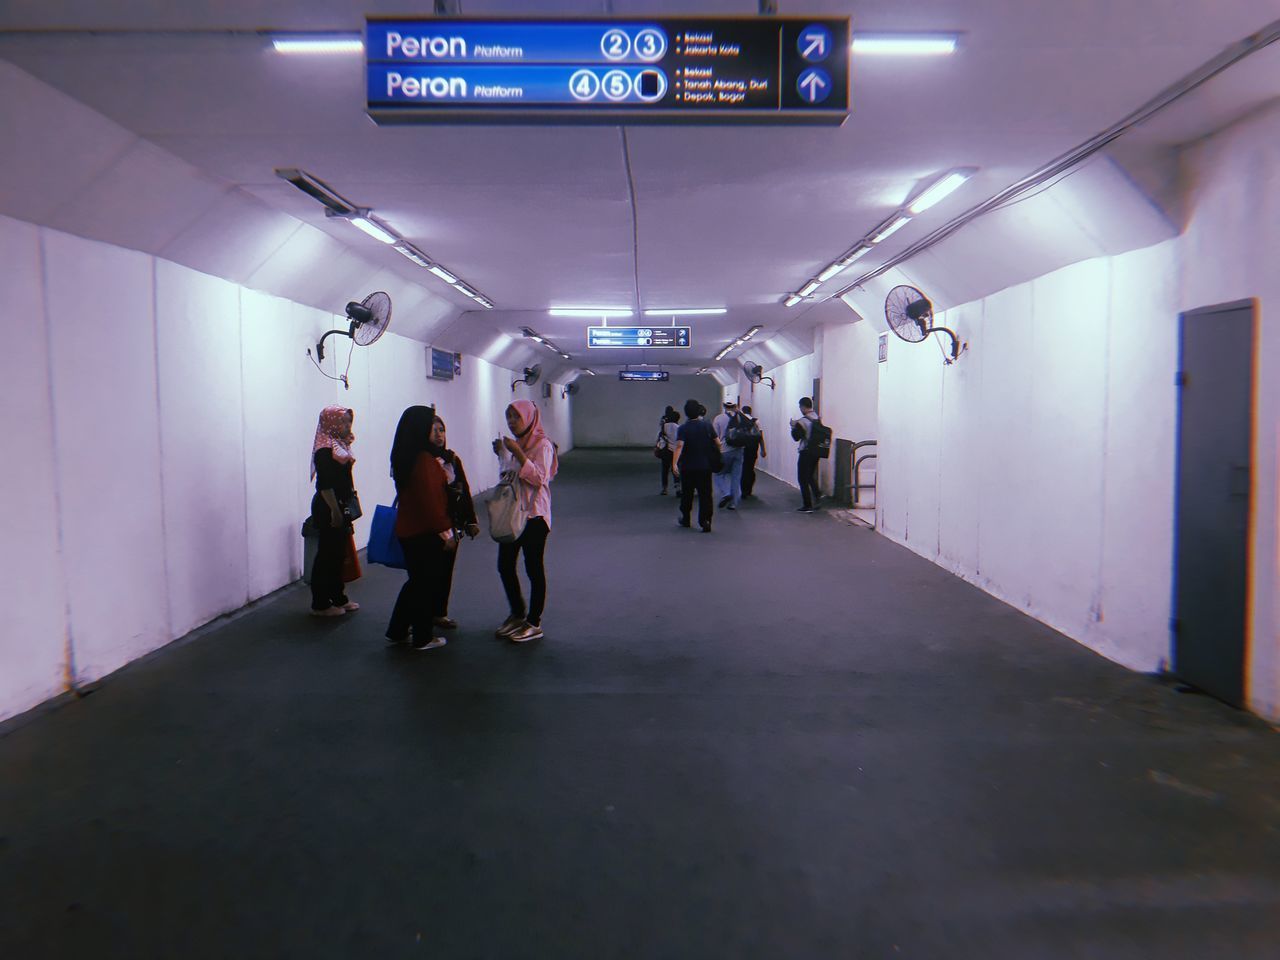 GROUP OF PEOPLE WALKING IN SUBWAY STATION